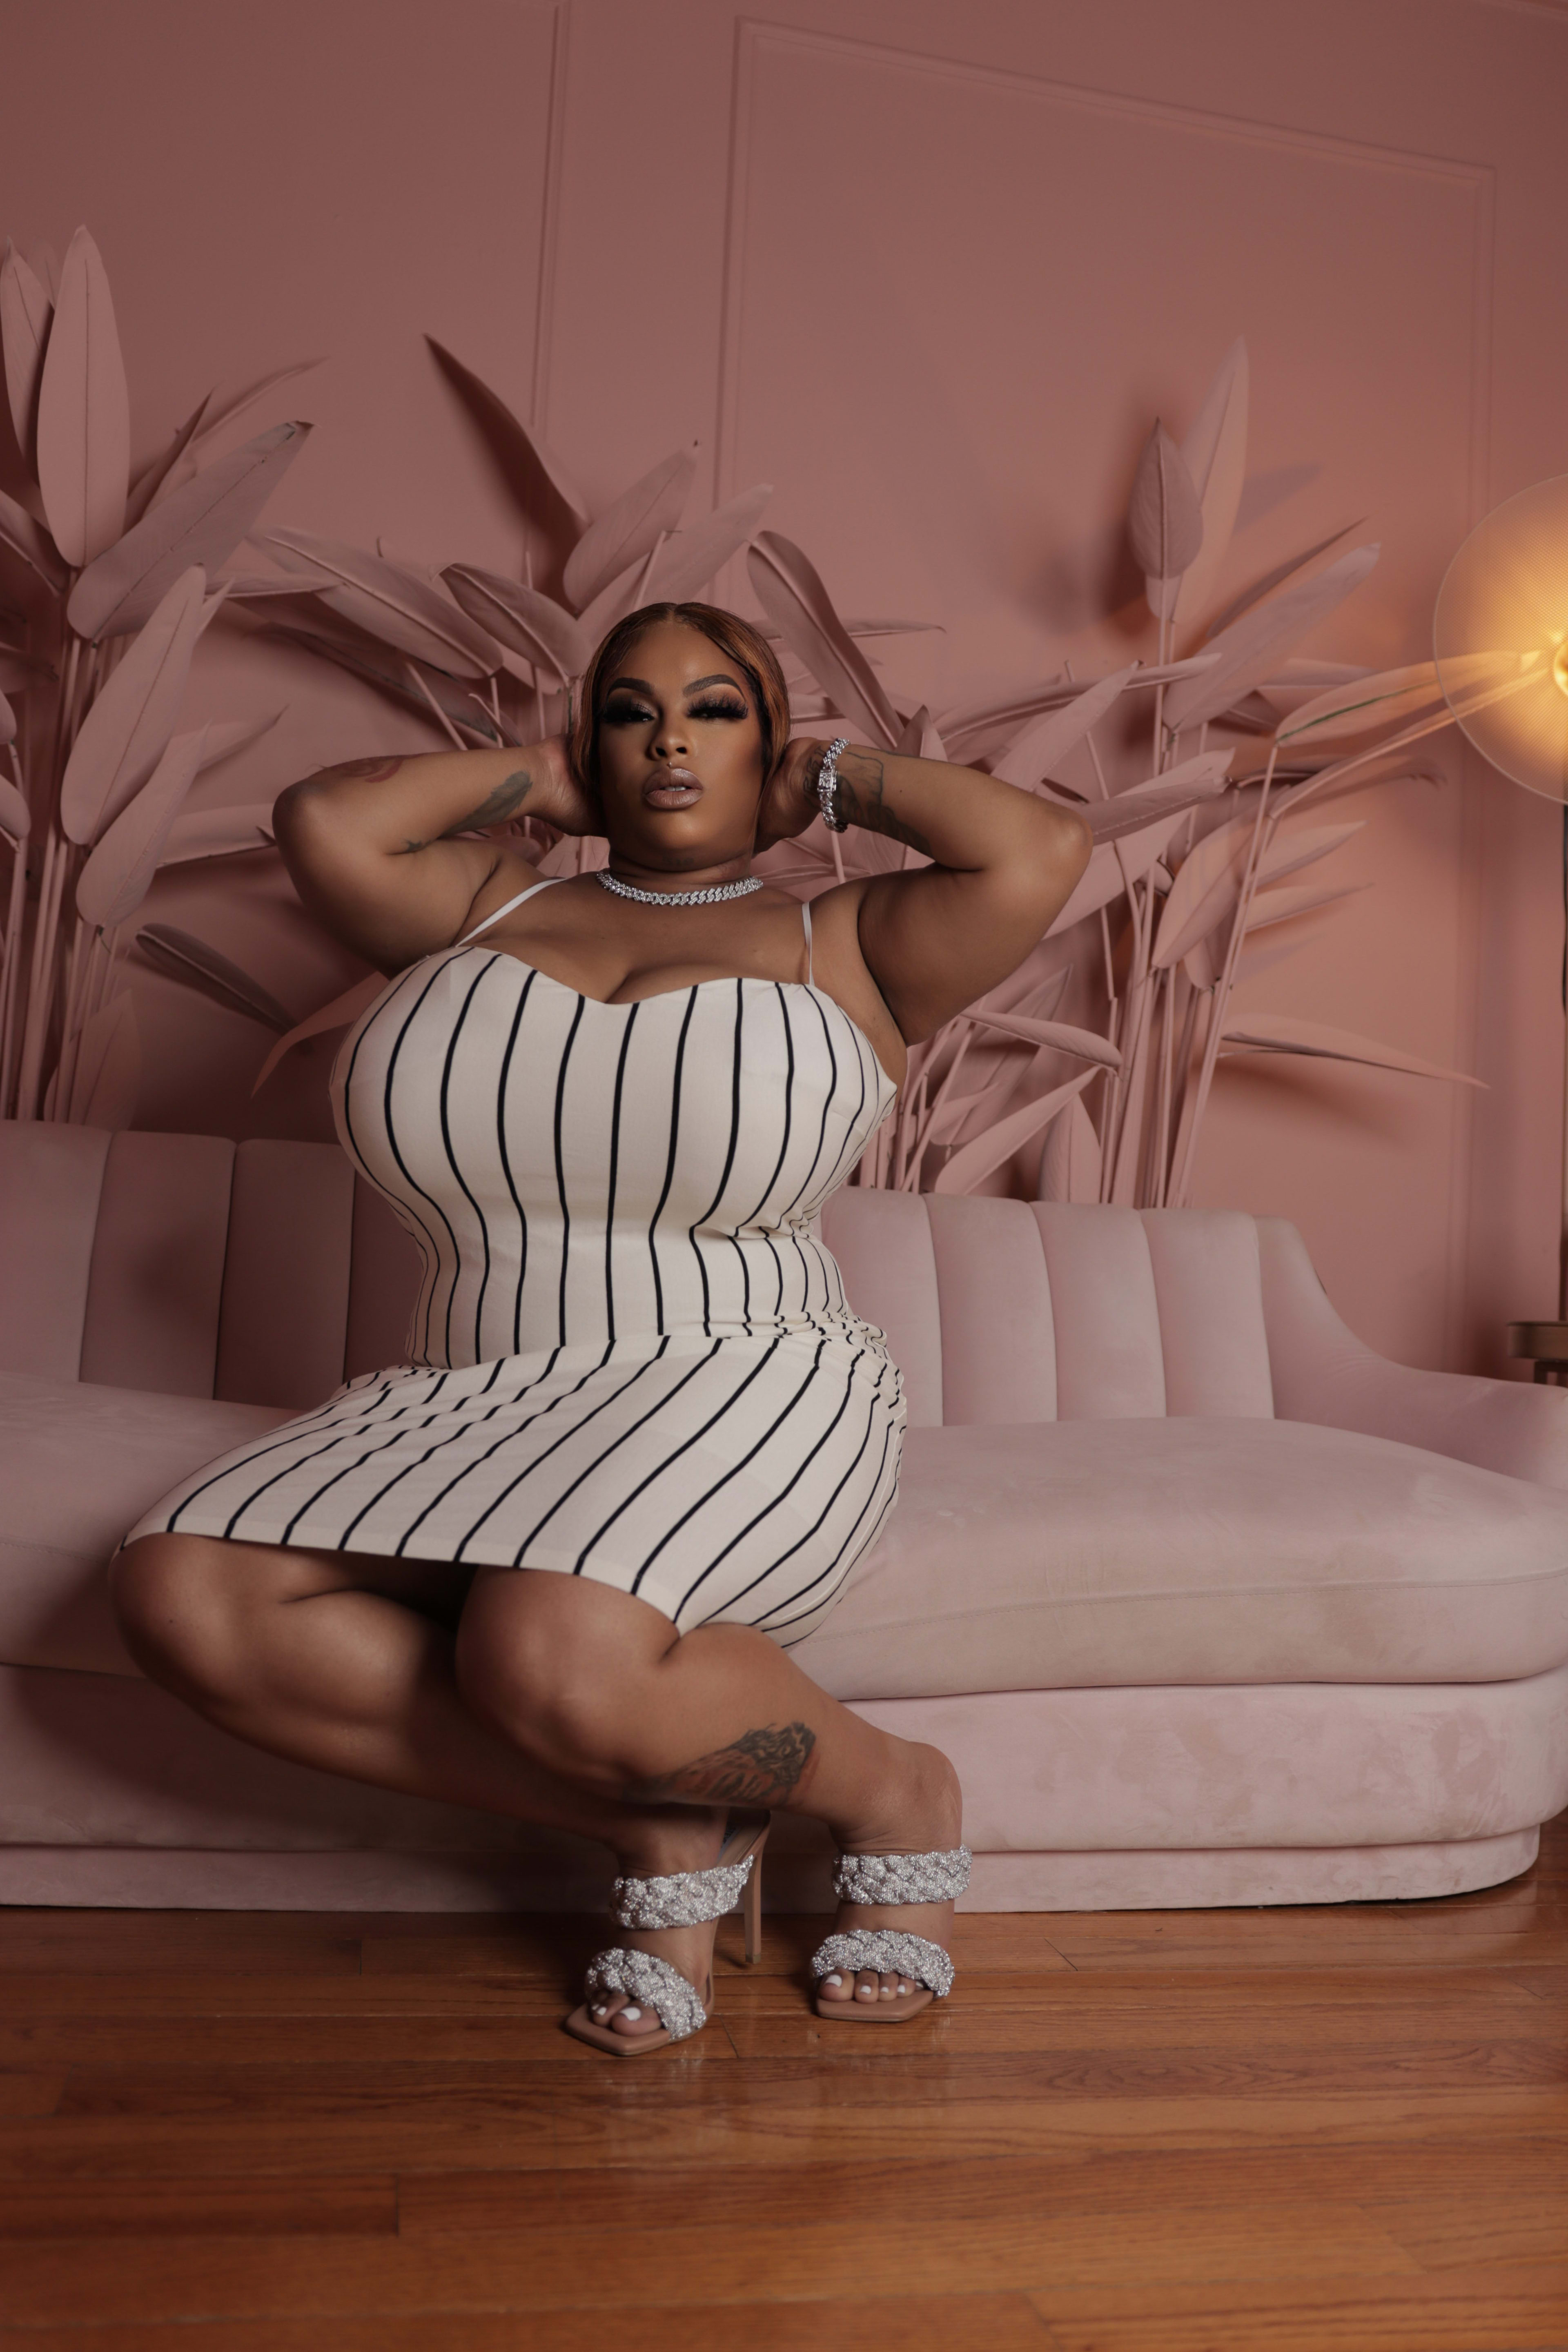 A woman in a striped dress posing for a fashion photo shoot on a pink couch.